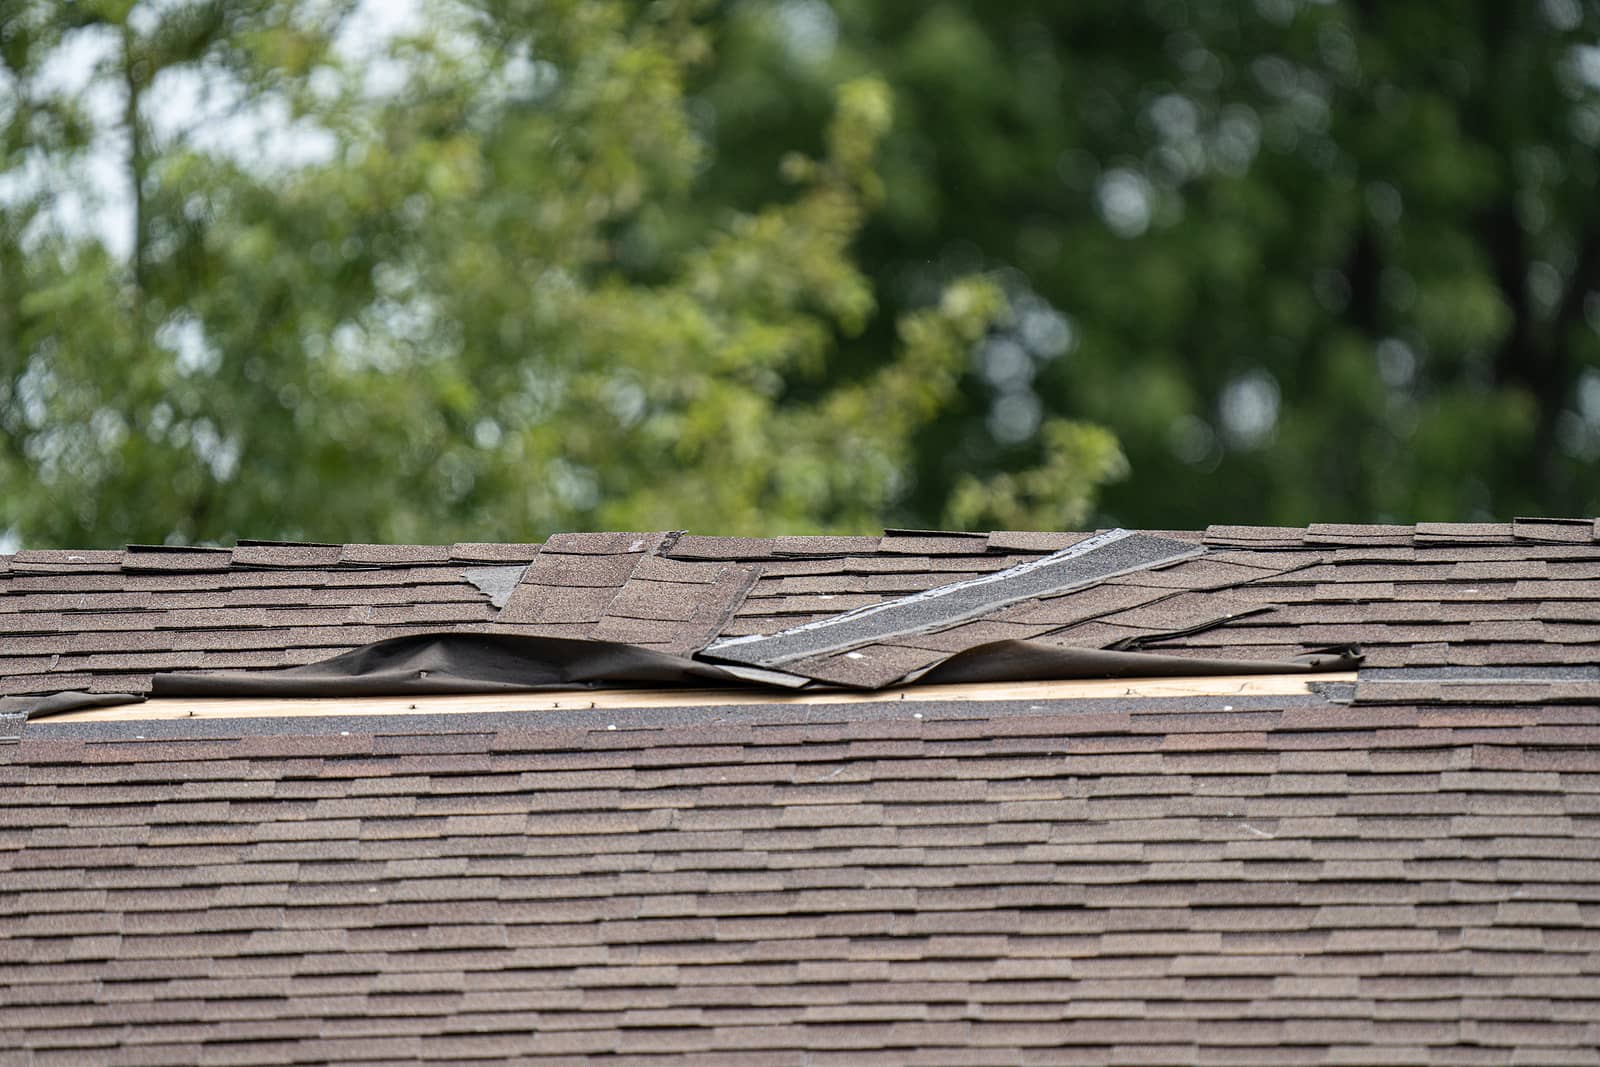 How to Get Homeowners Insurance with a Bad Roof